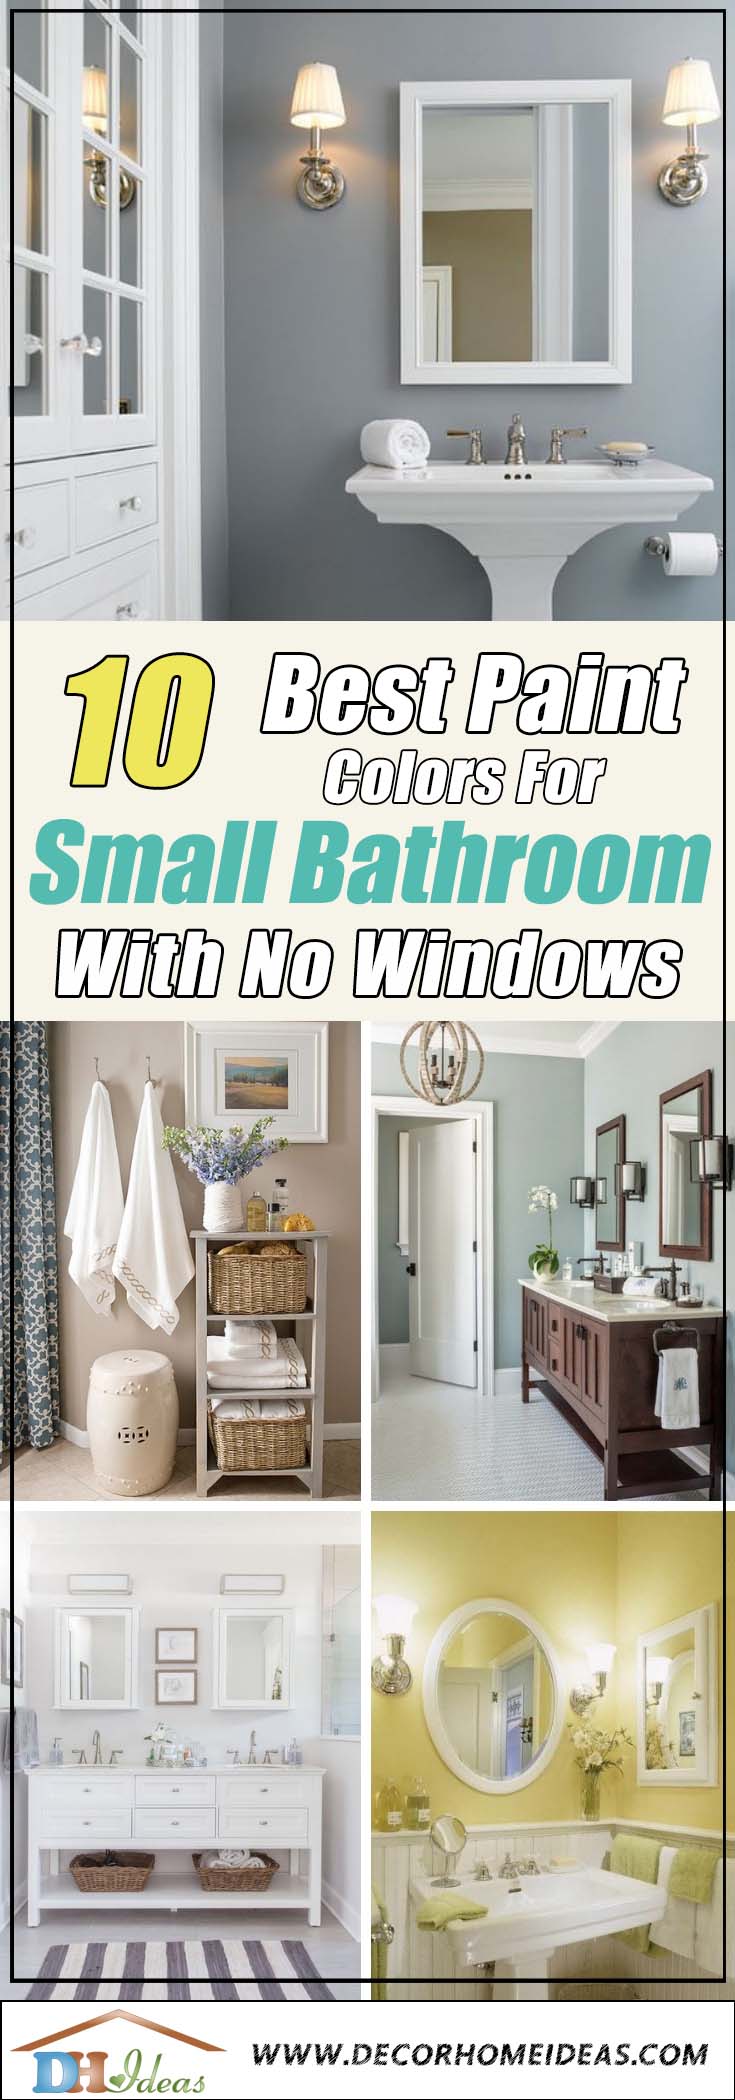 10 Best Paint Colors For Small Bathroom, What Are Good Colors For Small Bathrooms